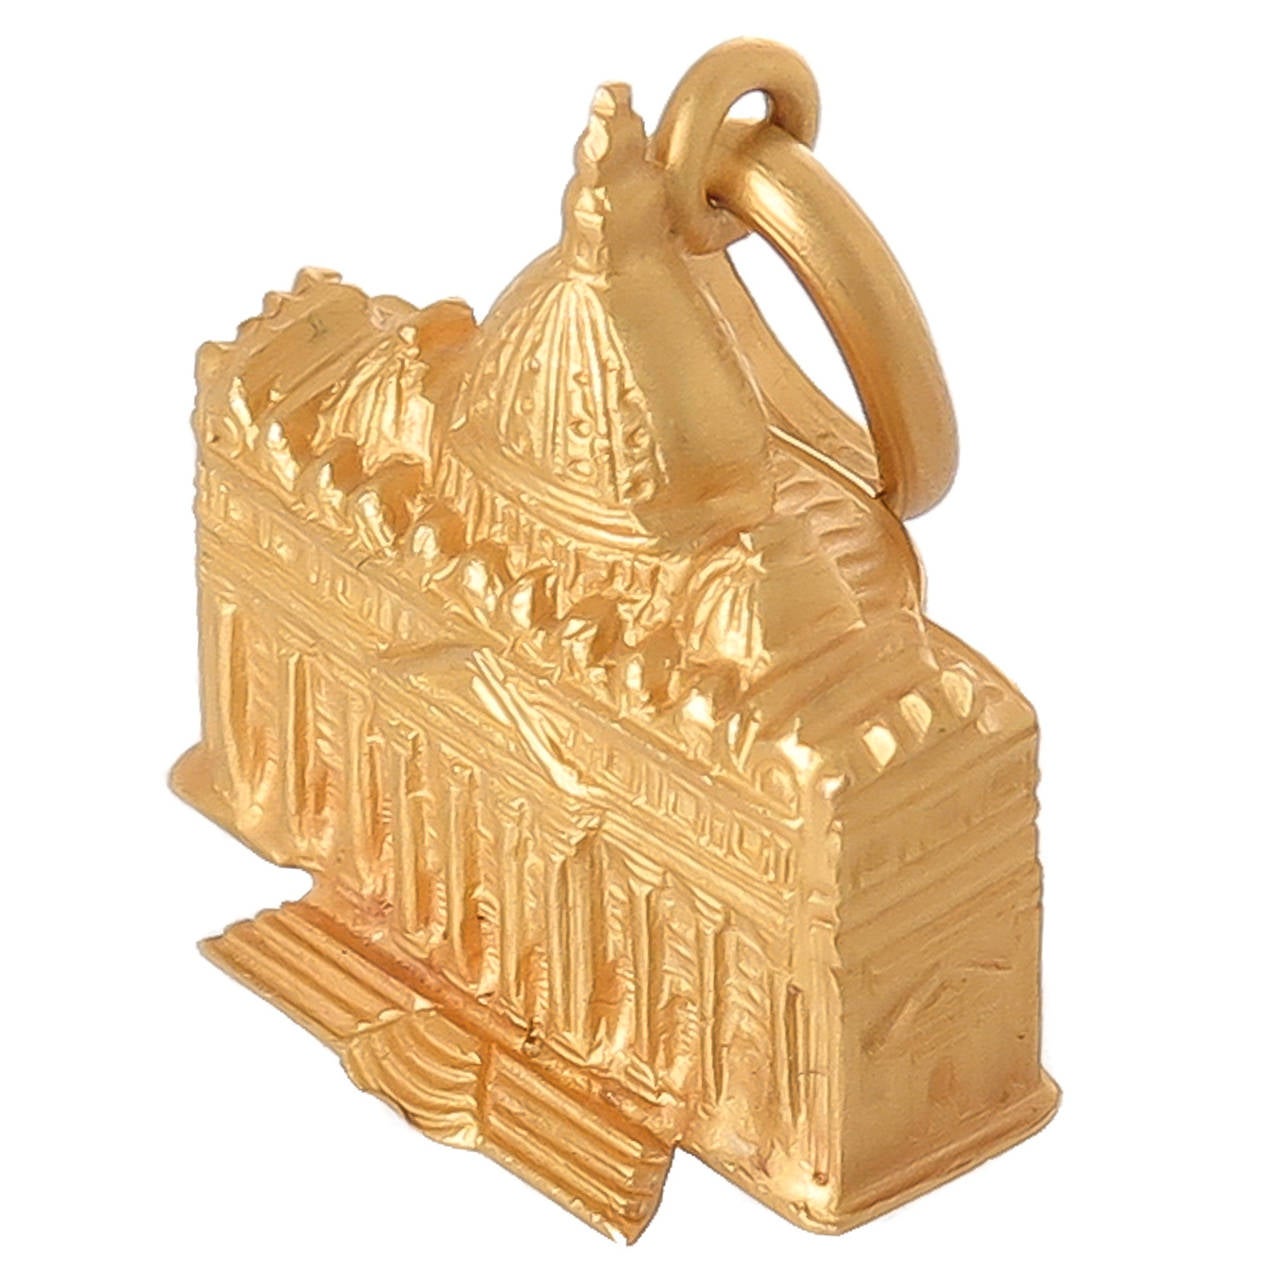 Circa 1970s 18K Yellow Gold Charm of the Vatican, purchased in Rome in the 1970s and never worn.